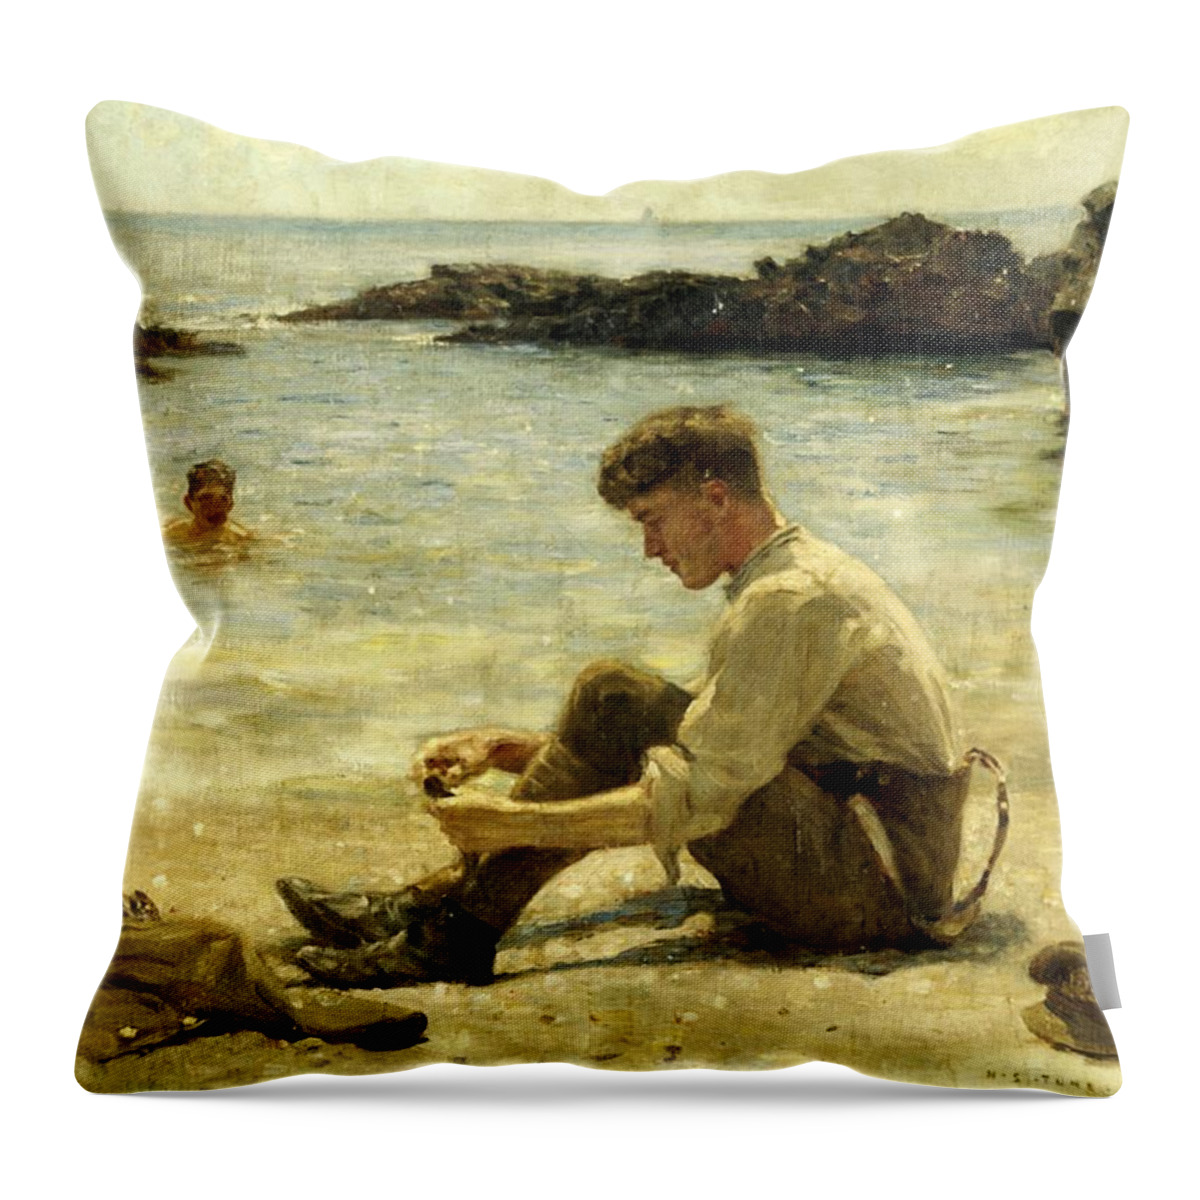 Lawrence Throw Pillow featuring the painting Lawrence as a Cadet by Henry Scott Tuke